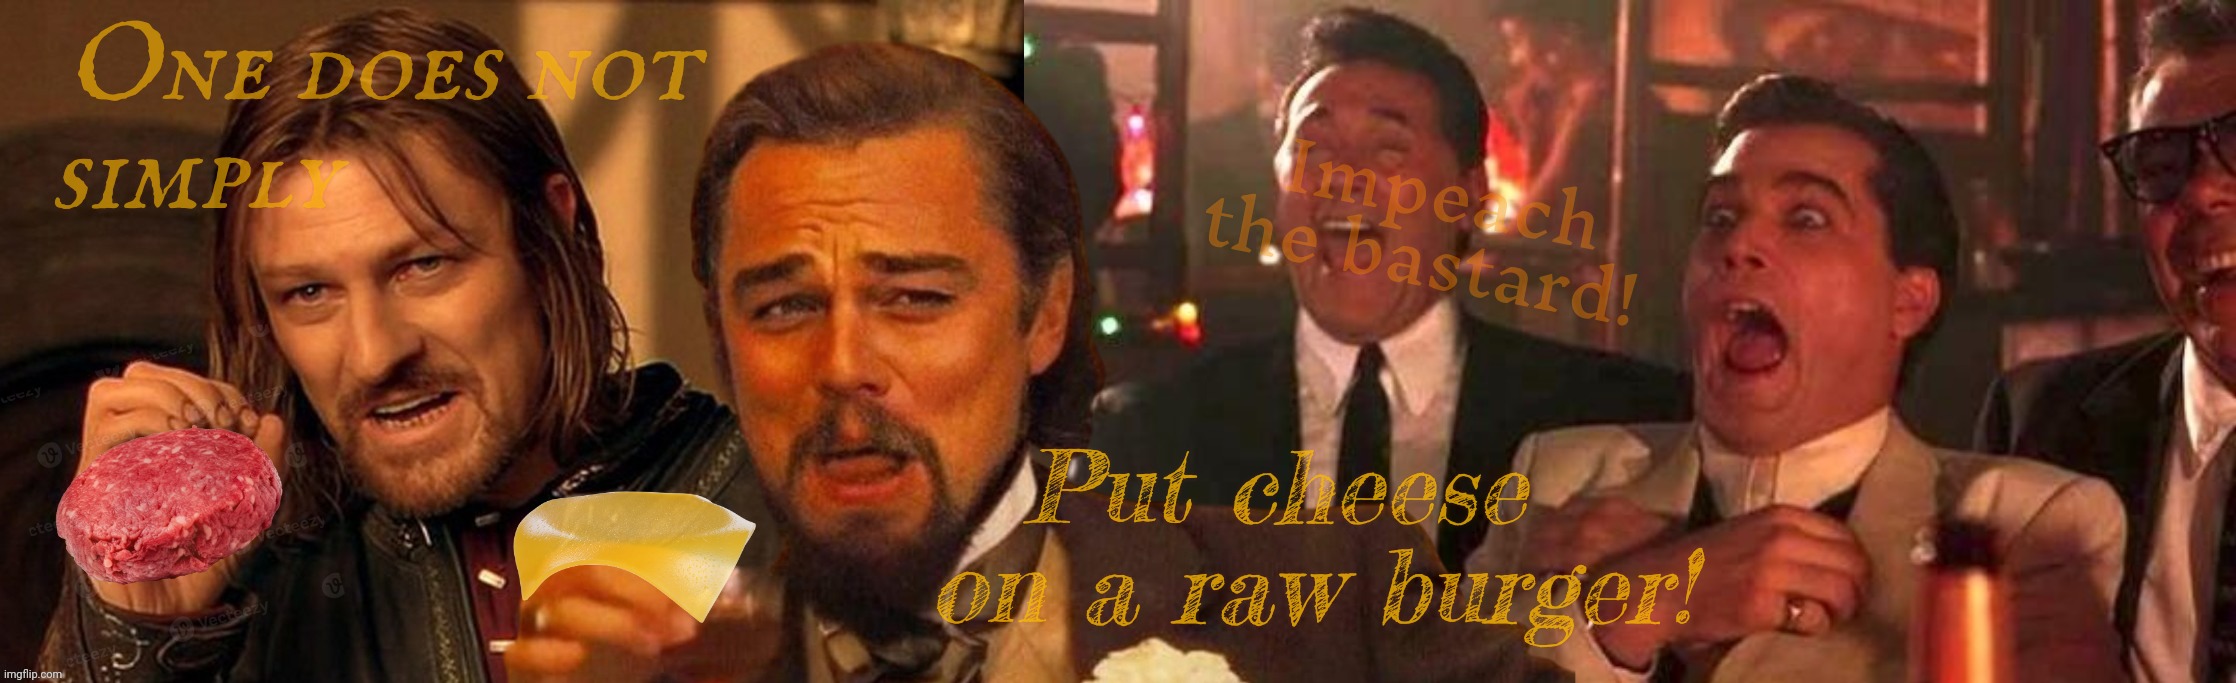 Cheeseburgergate, grounds for impeachment! | One does not
simply Put cheese   on a raw burger! Impeach the bastard! | image tagged in one does not simply laughing leo goodfellas laughing,cheeseburgergate,chuck schumer,who cut the cheese,get a hobby | made w/ Imgflip meme maker